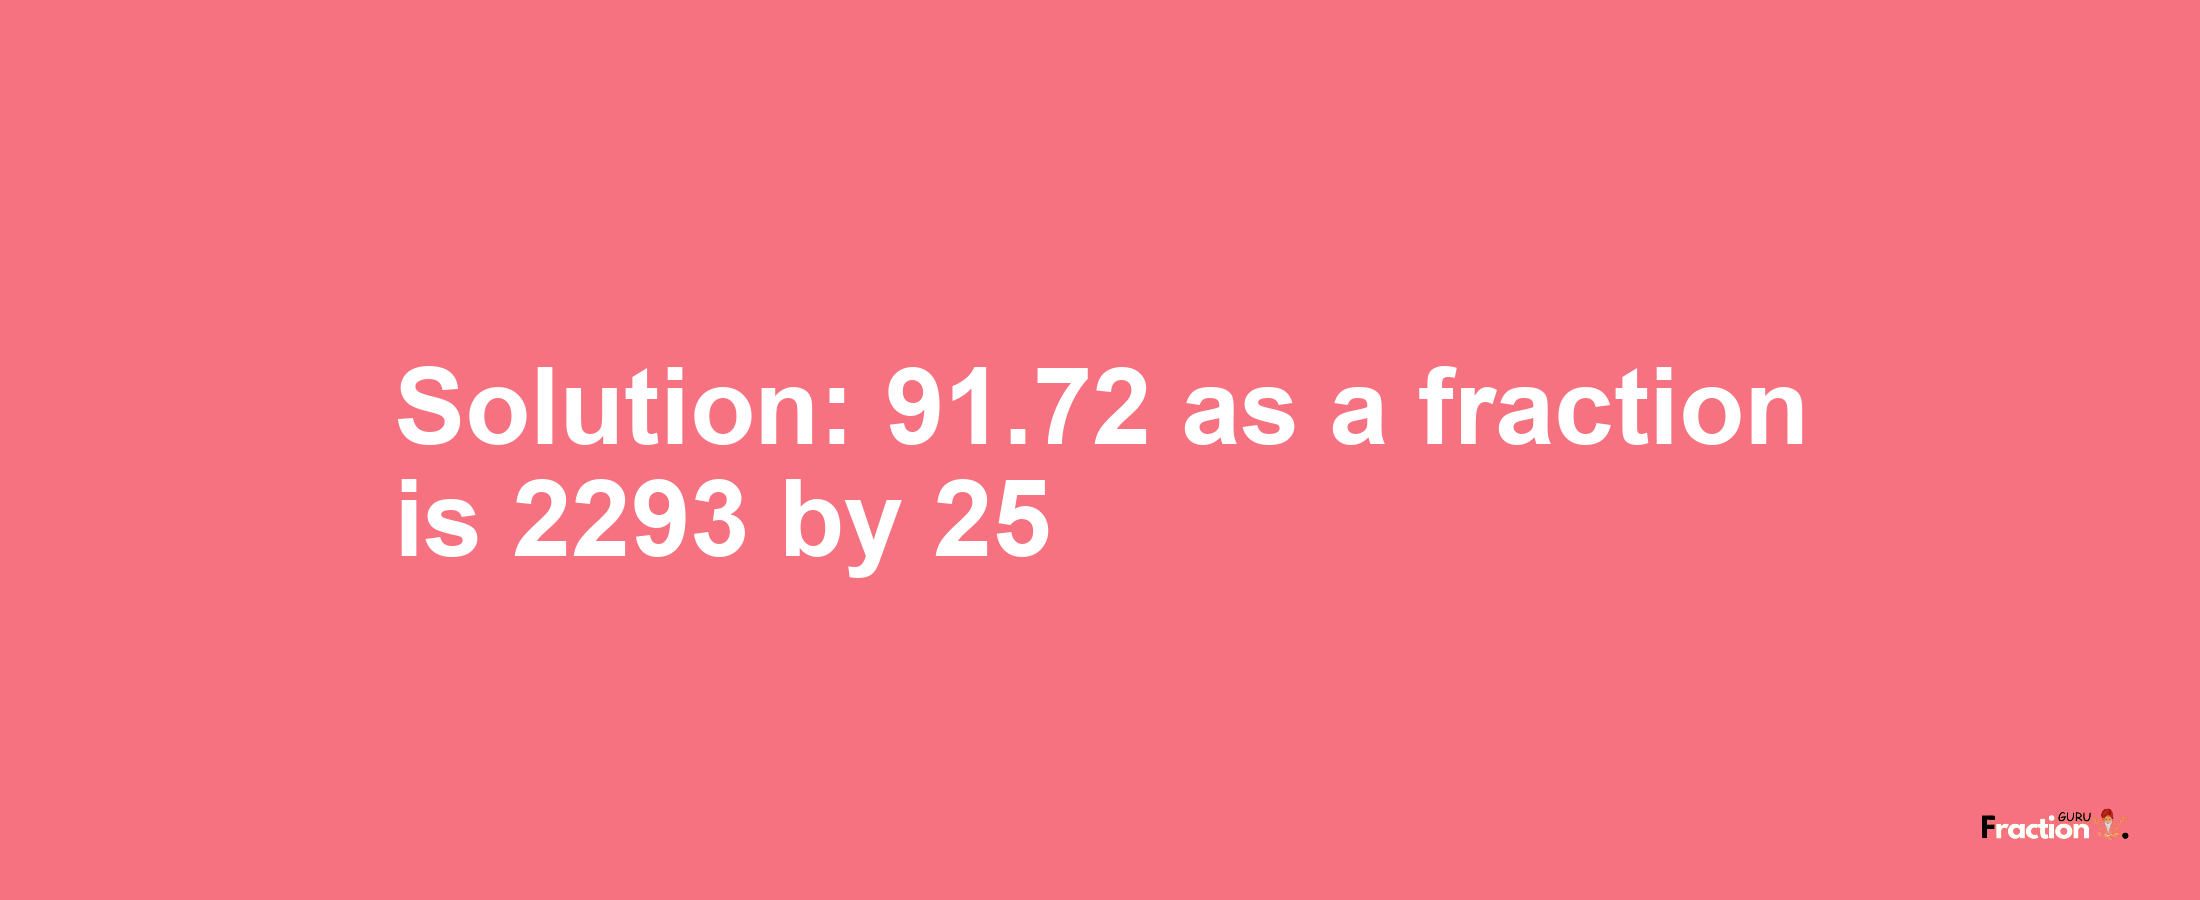 Solution:91.72 as a fraction is 2293/25